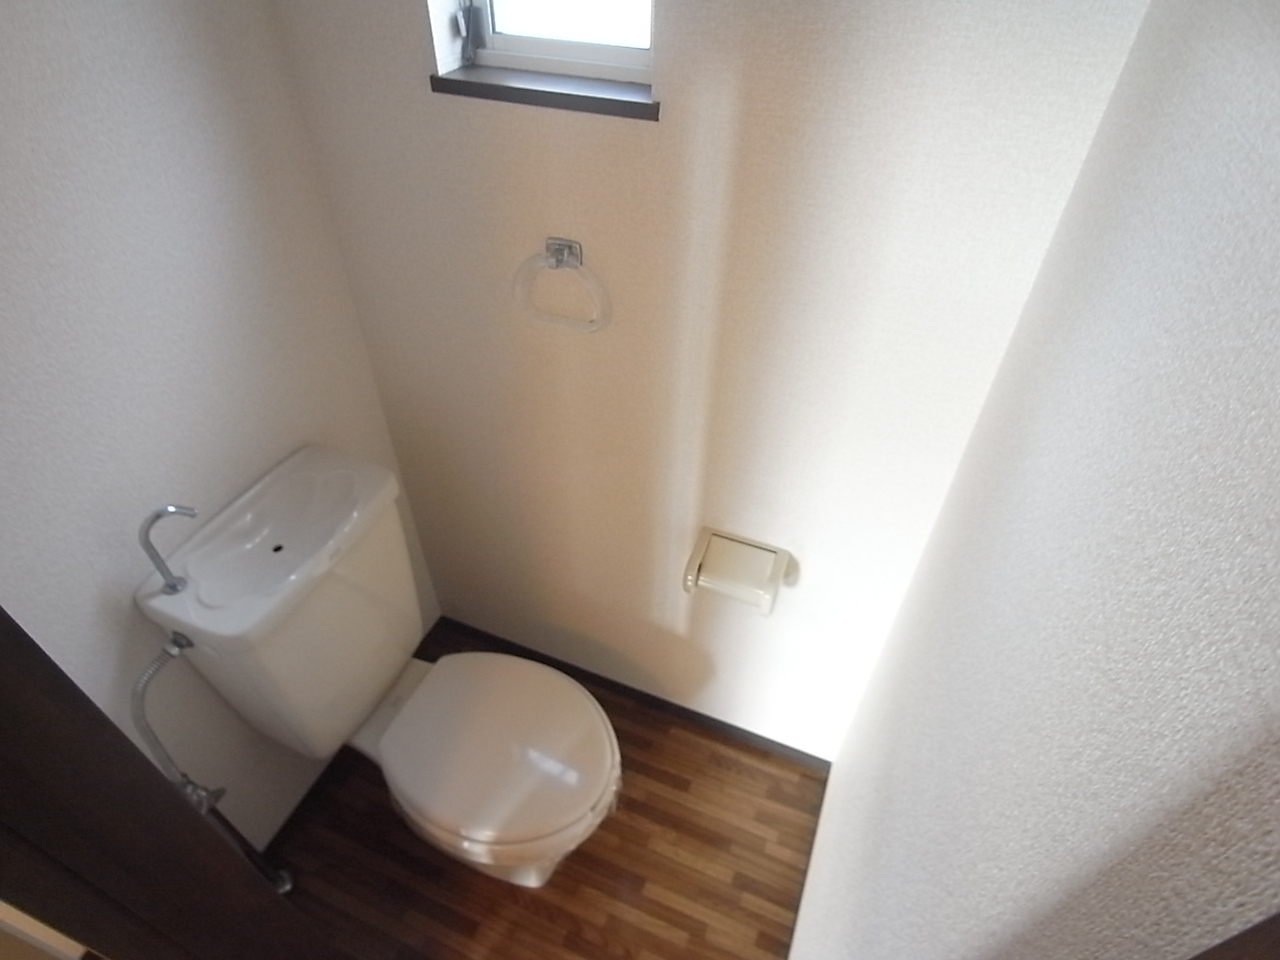 Toilet. Same property reference photograph